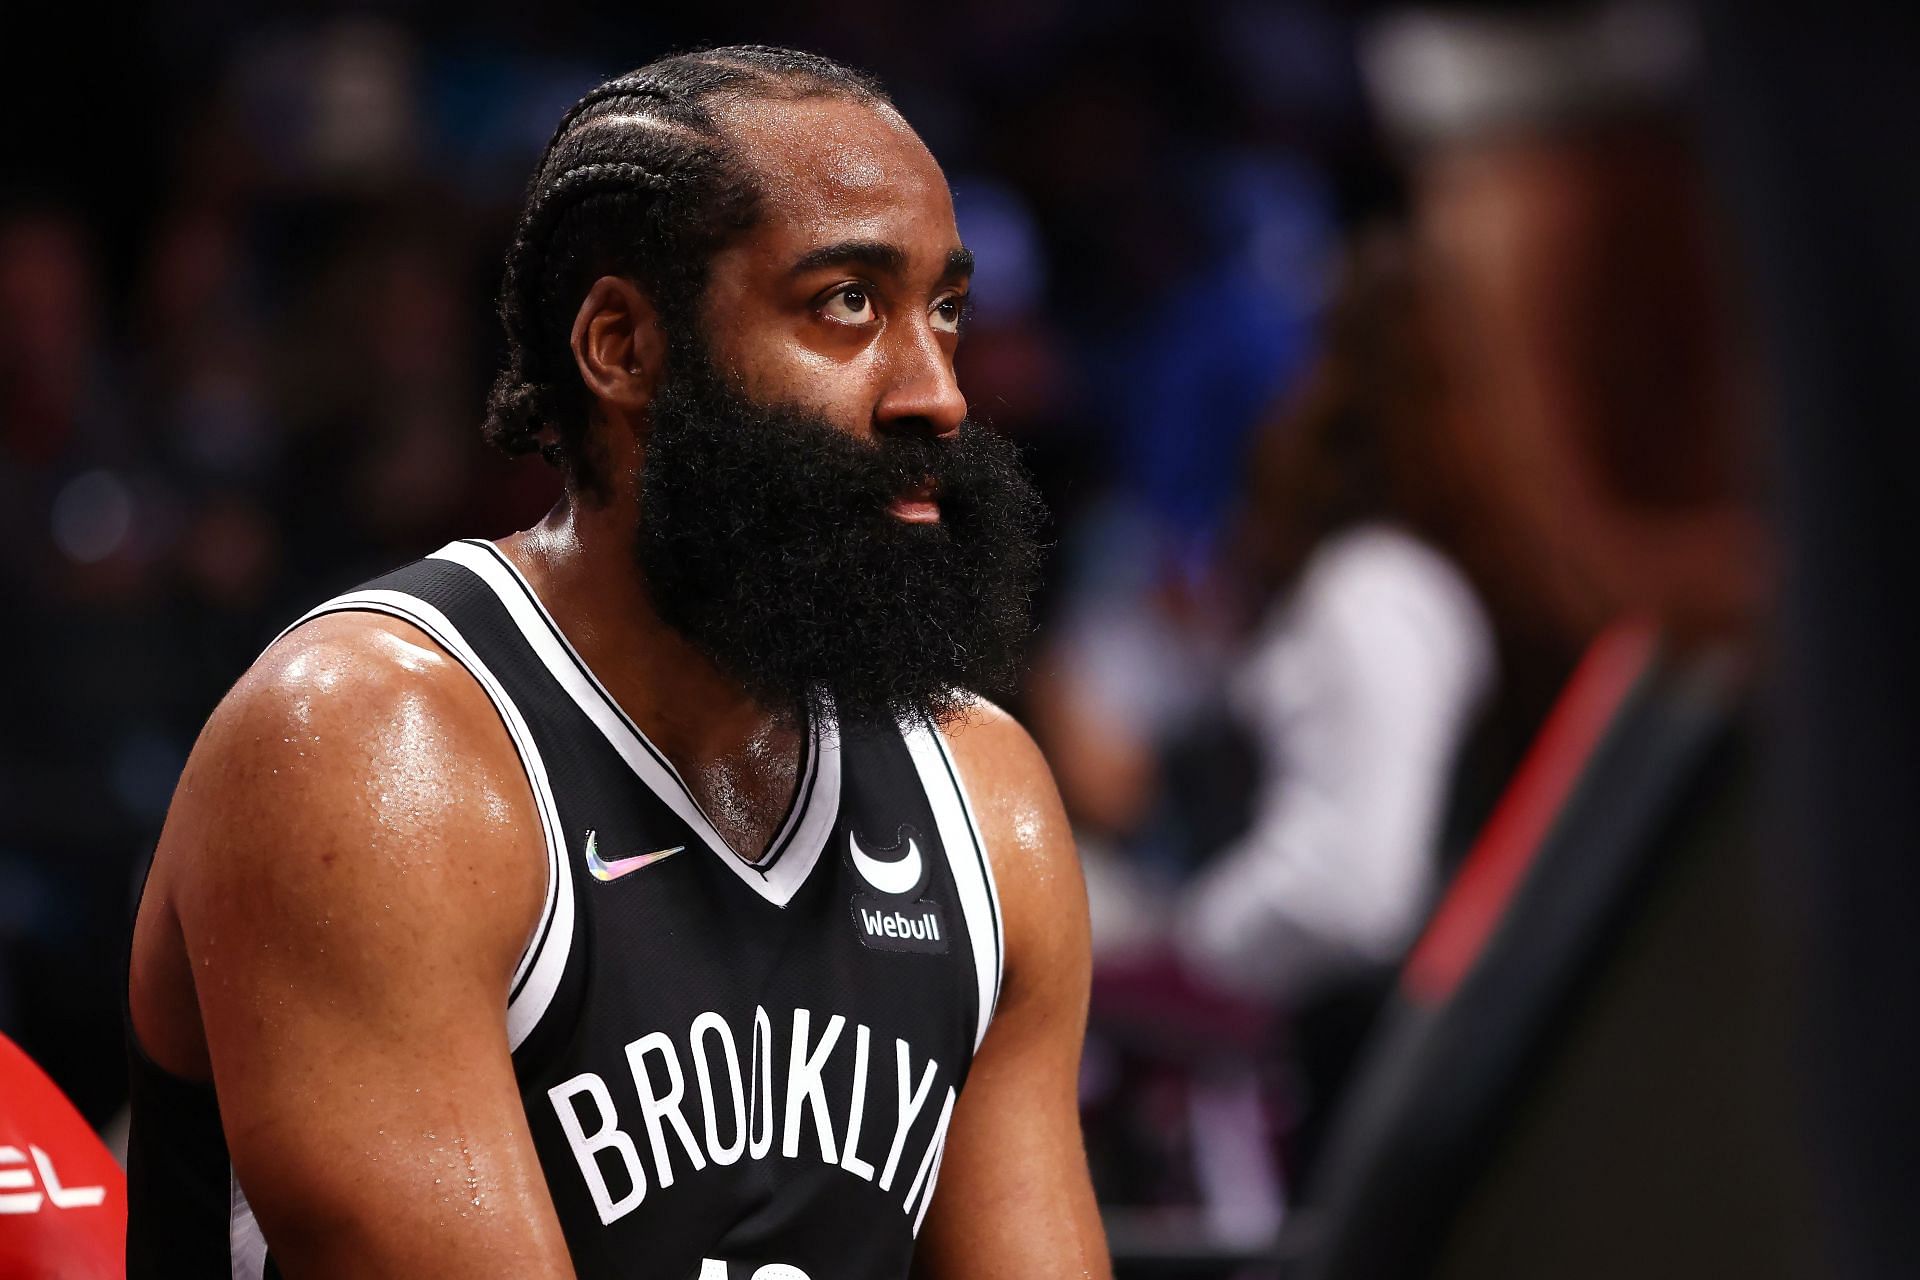 Brooklyn Nets superstar James Harden has been trying to adjust to the new rule changes in the NBA